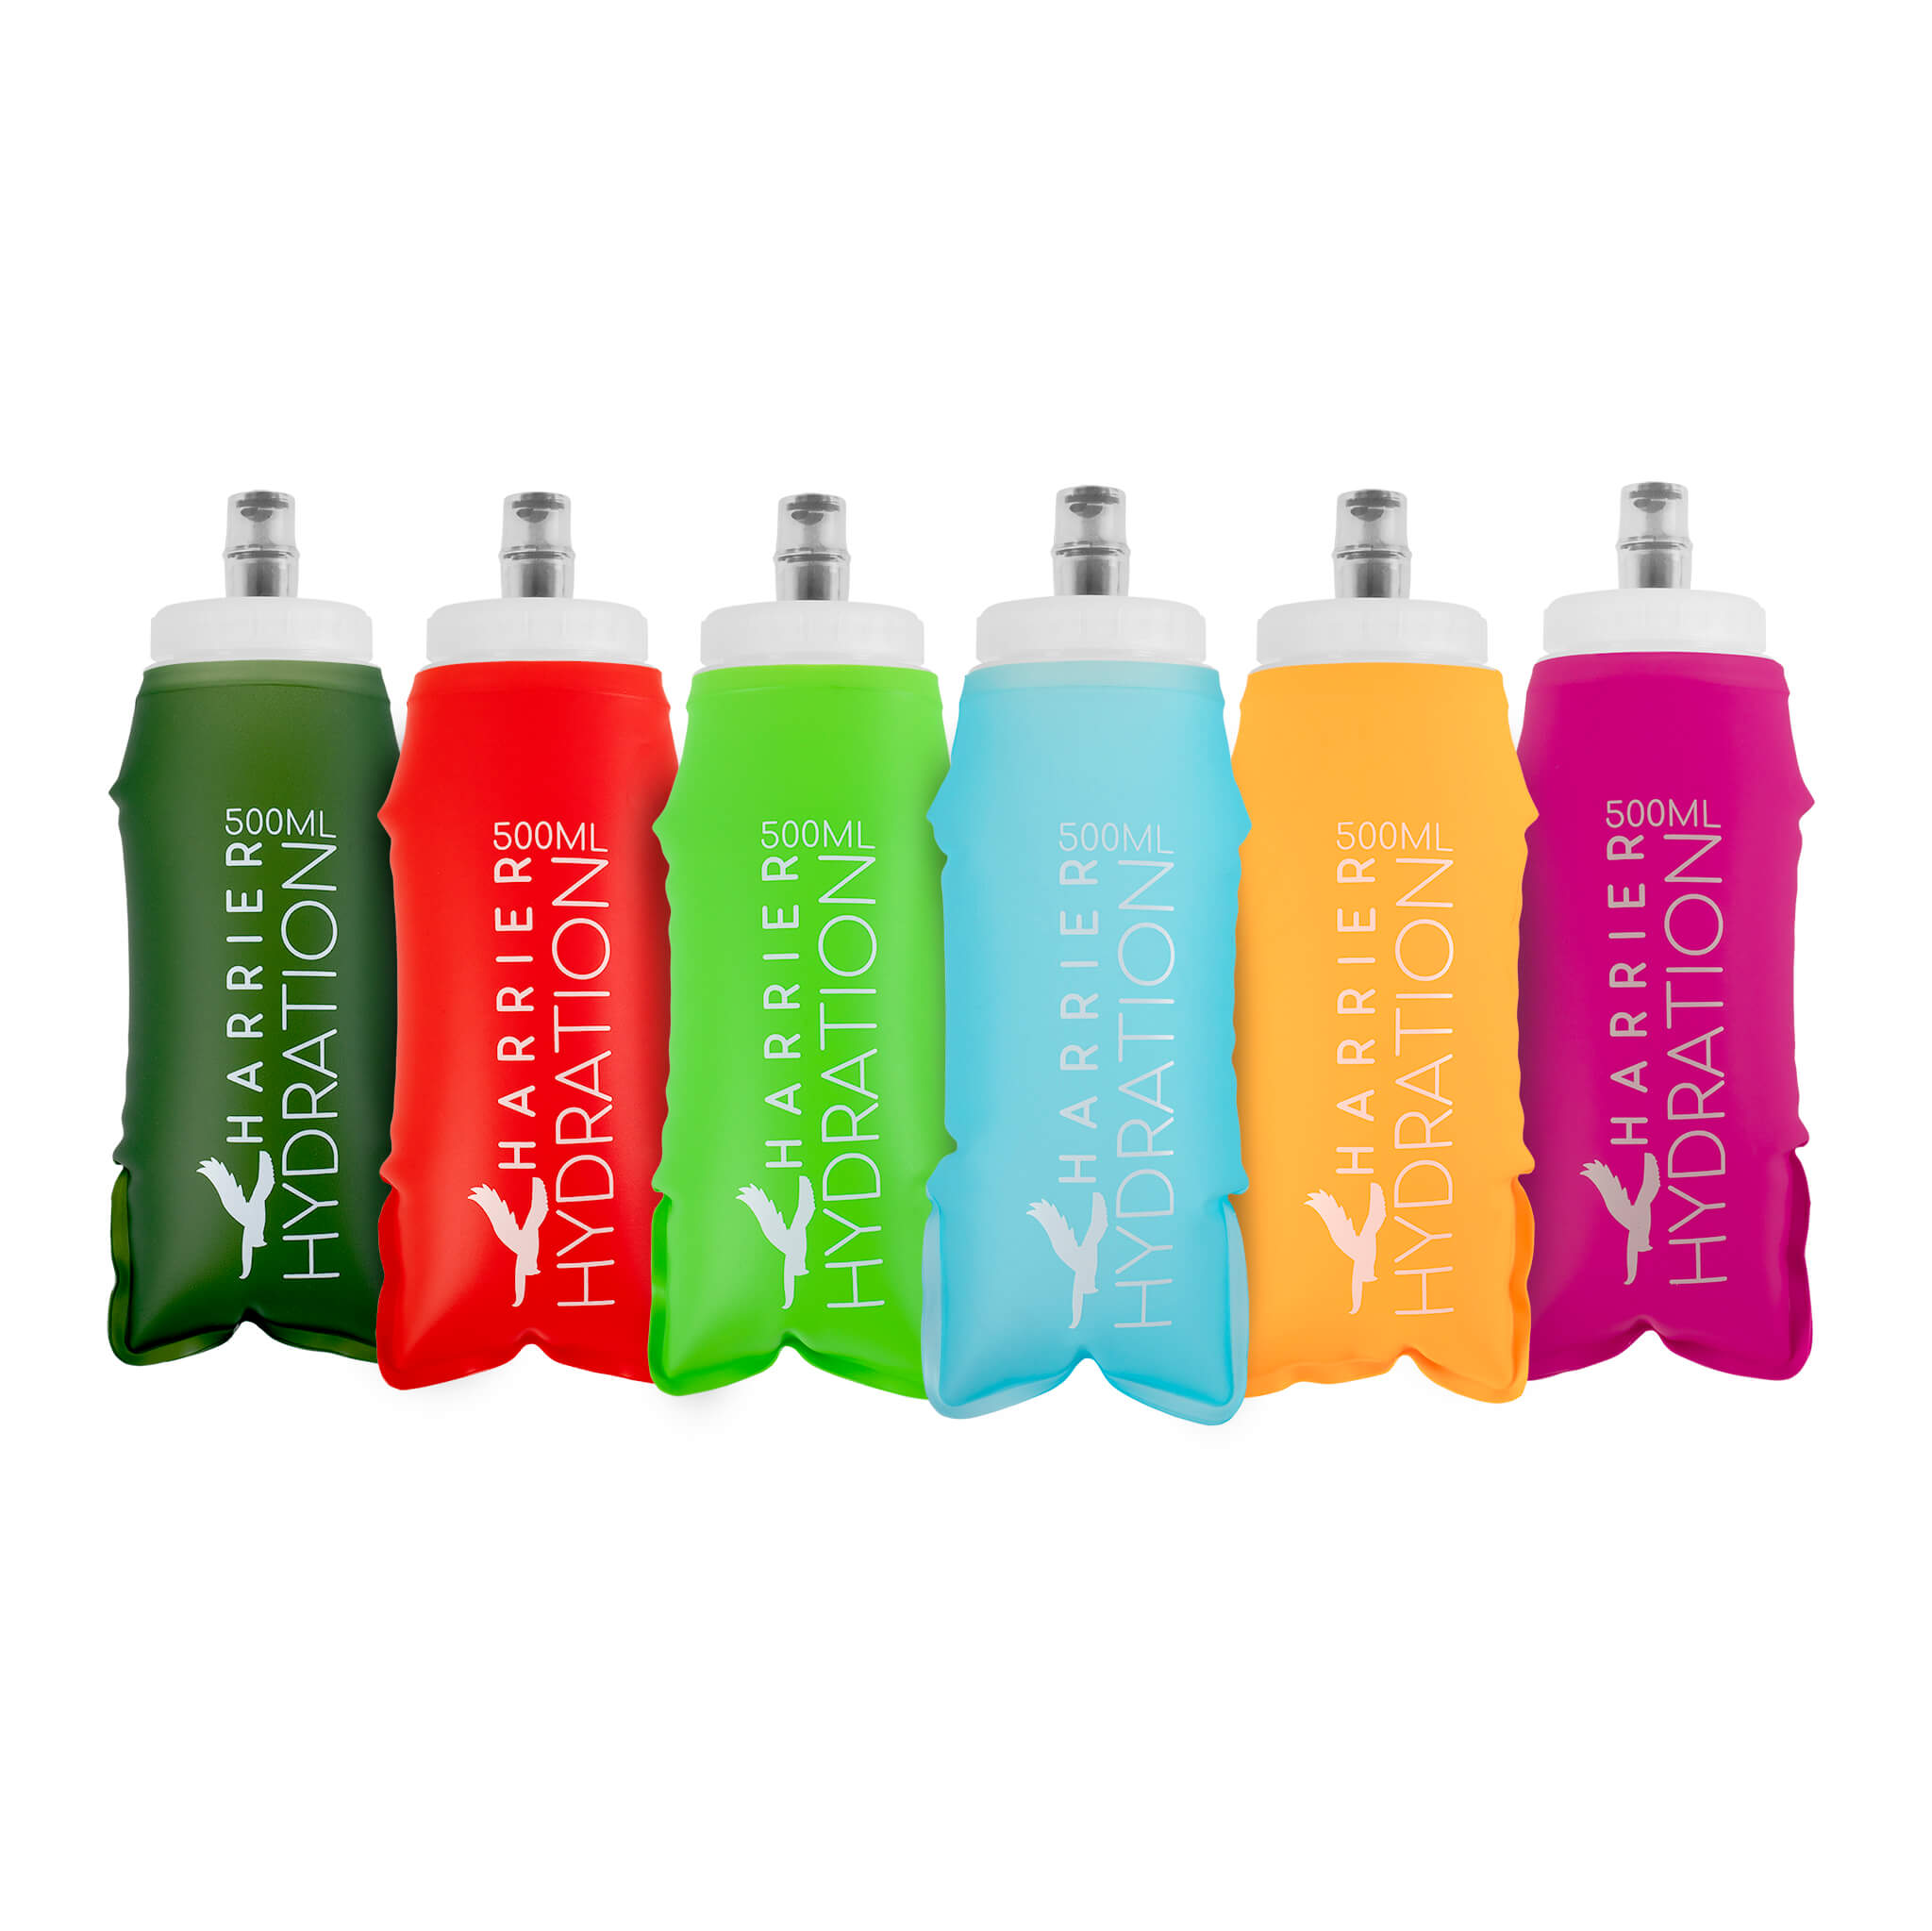 500ml Premium Soft Flask Collapsible Running Water Bottle (Set of